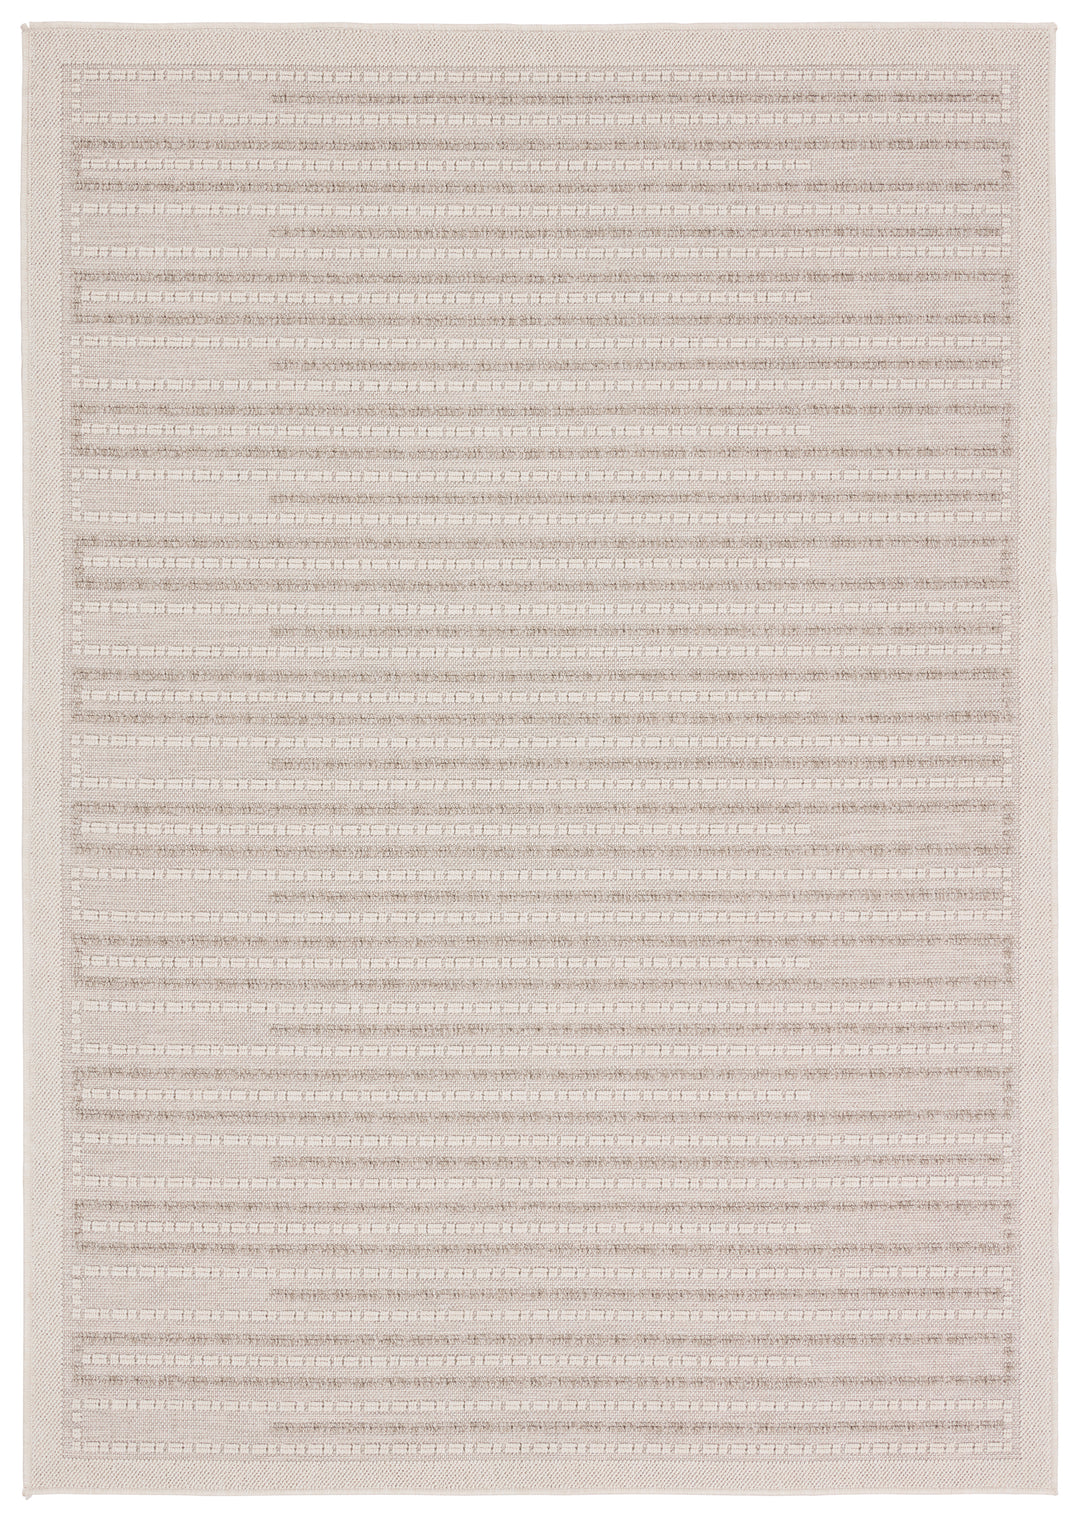 Vibe by Jaipur Living Theorem Indoor/Outdoor Striped Taupe/ Cream Area Rug (CONTINUUM - CNT03)